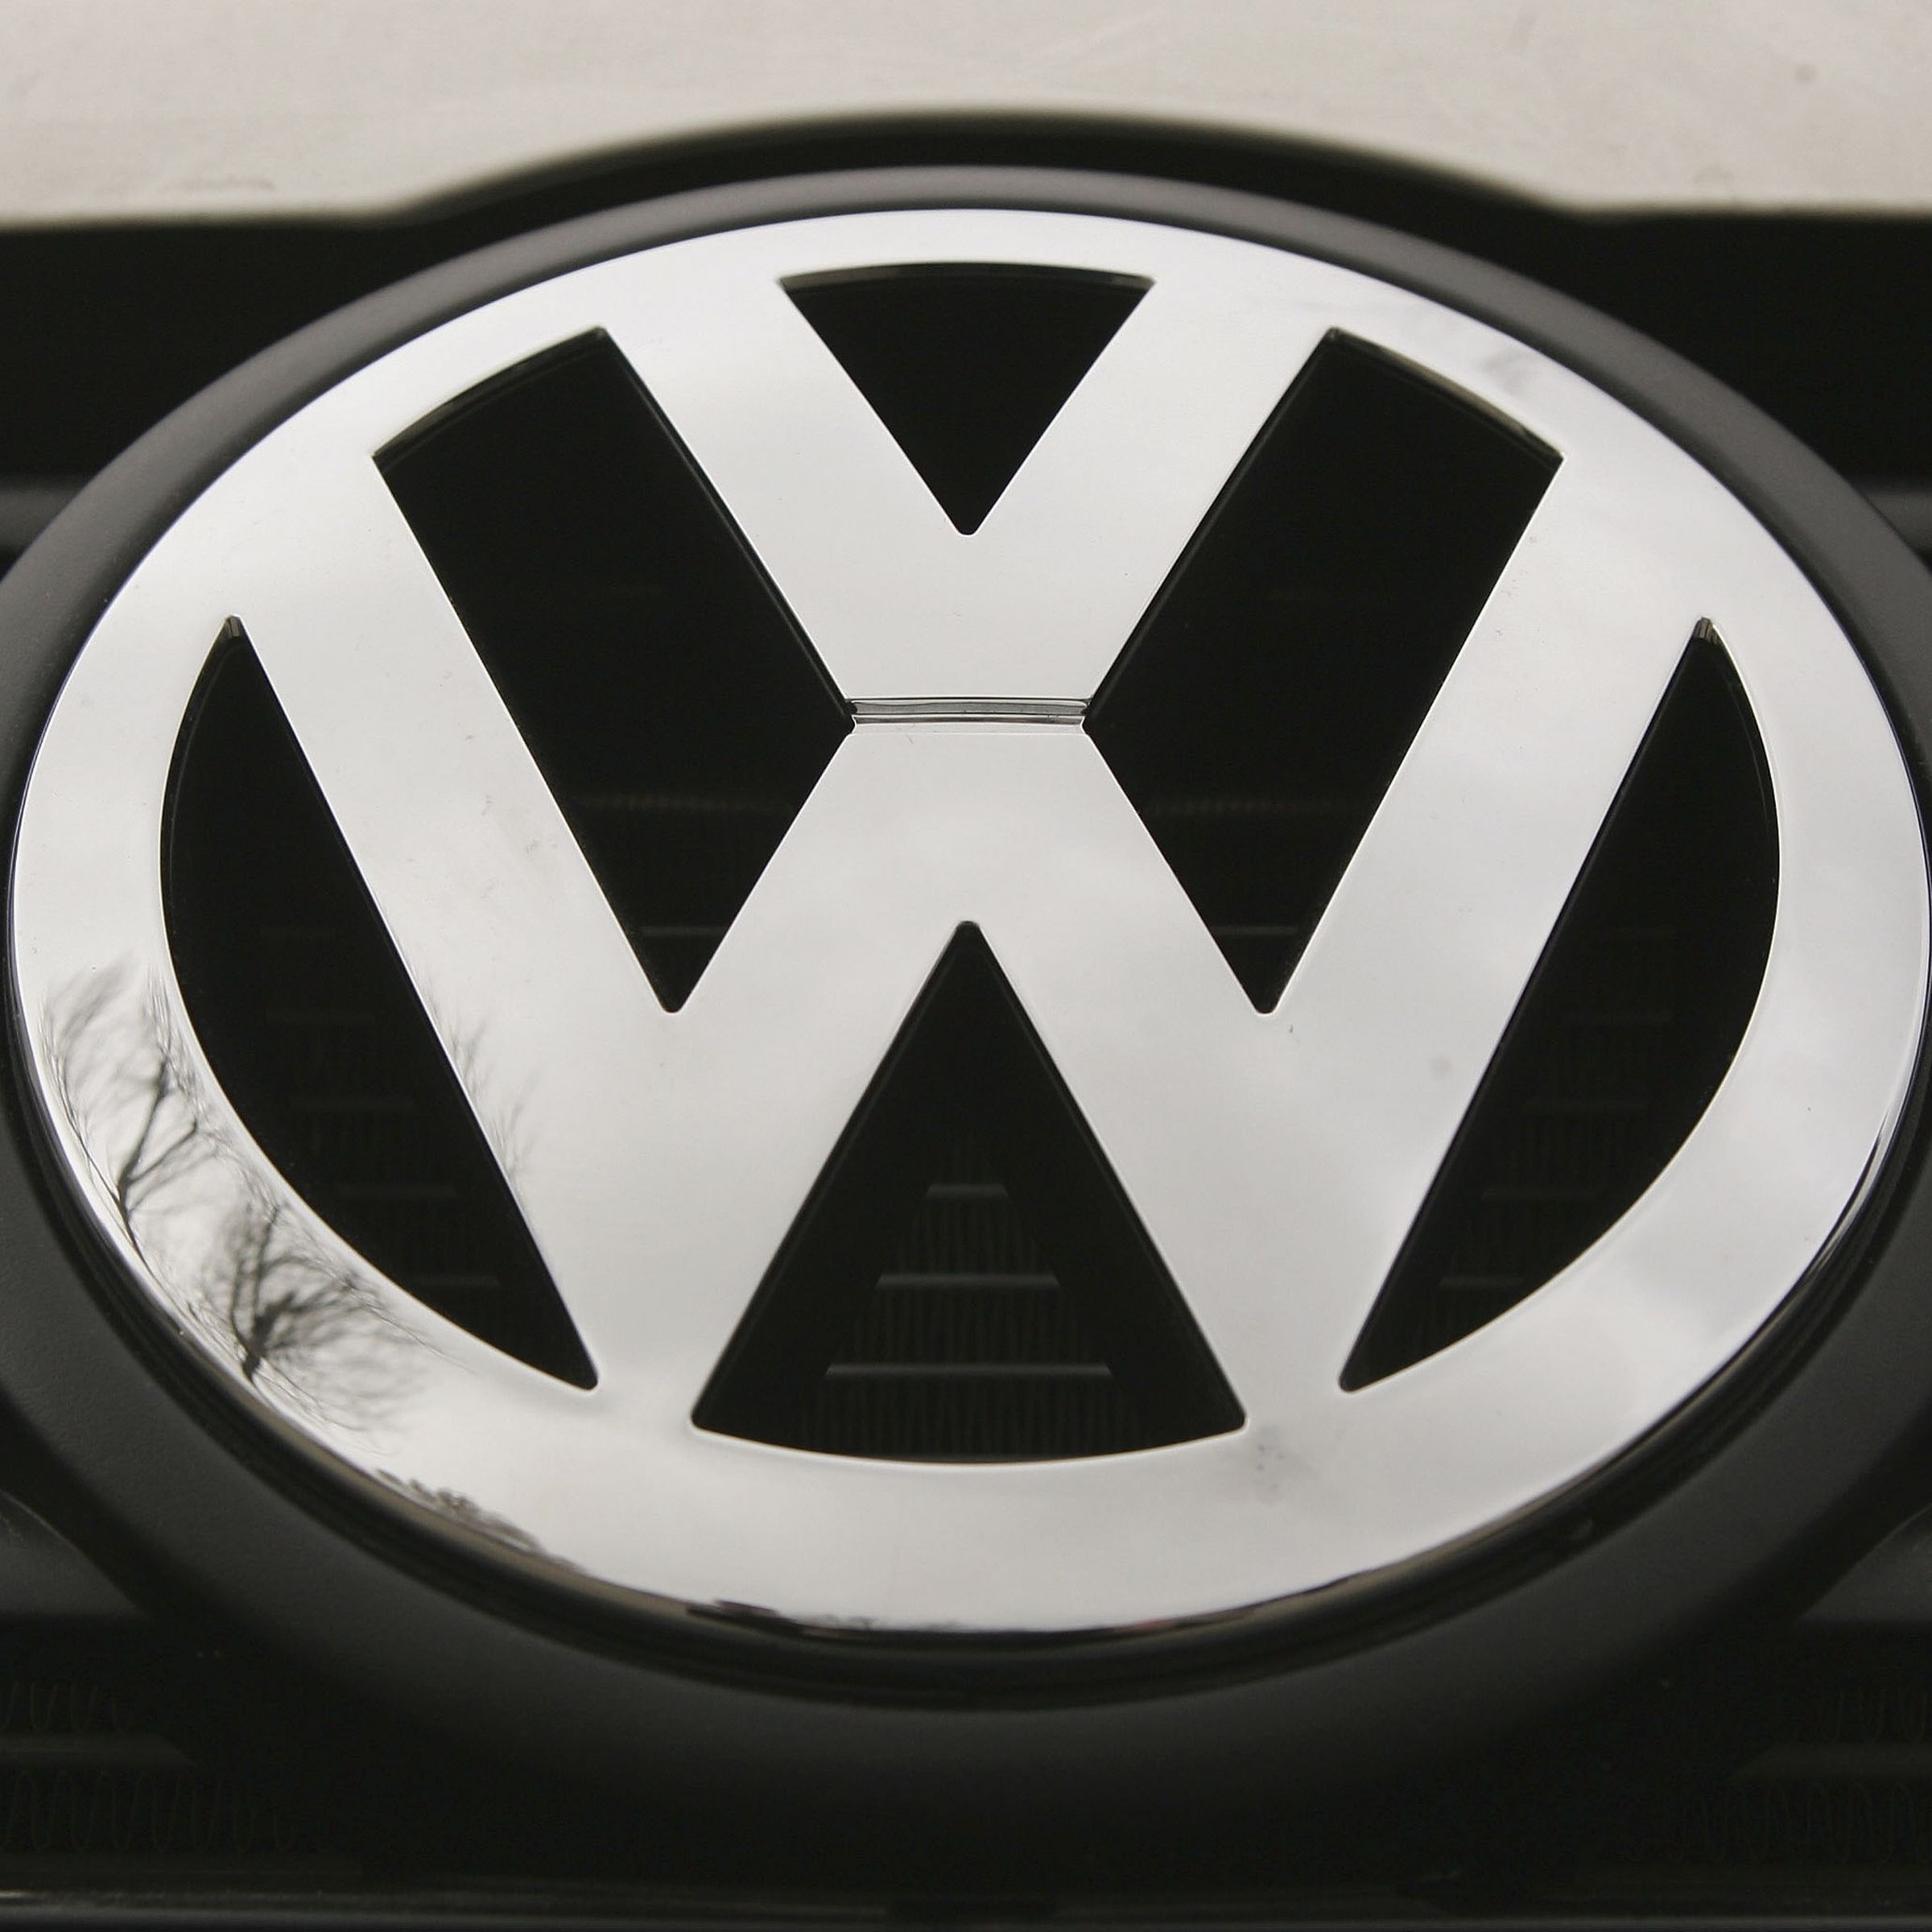 Volkswagen To Announce Results for 2006